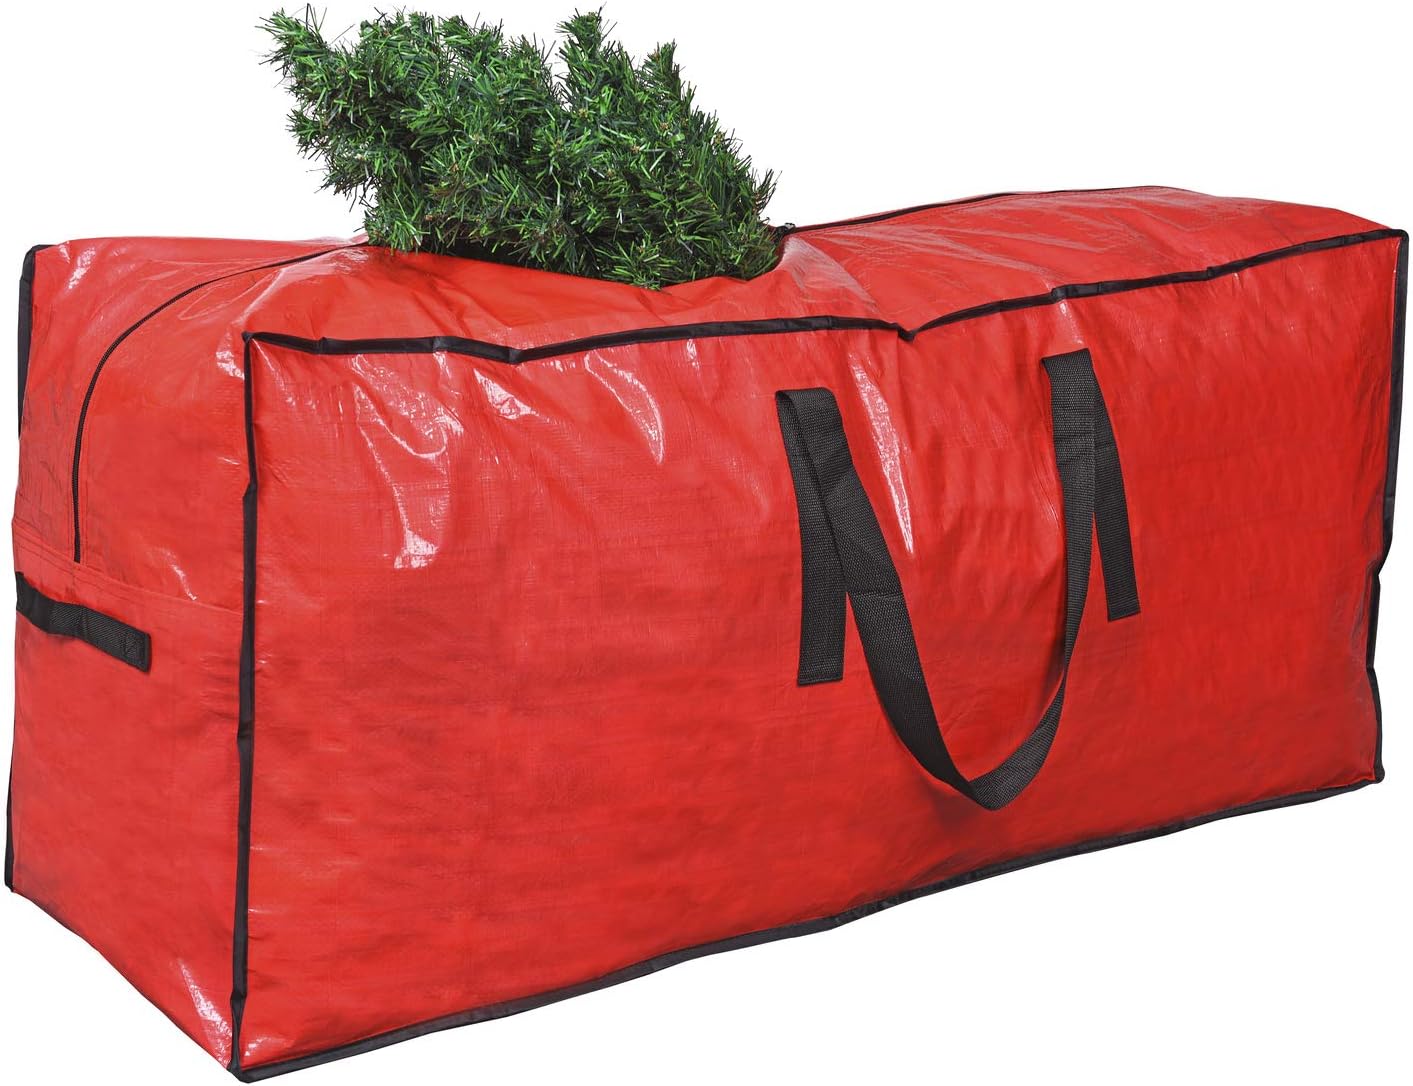 Firstness Christmas Tree Storage Bag with Durable Reinforced Handles & Dual Zipper